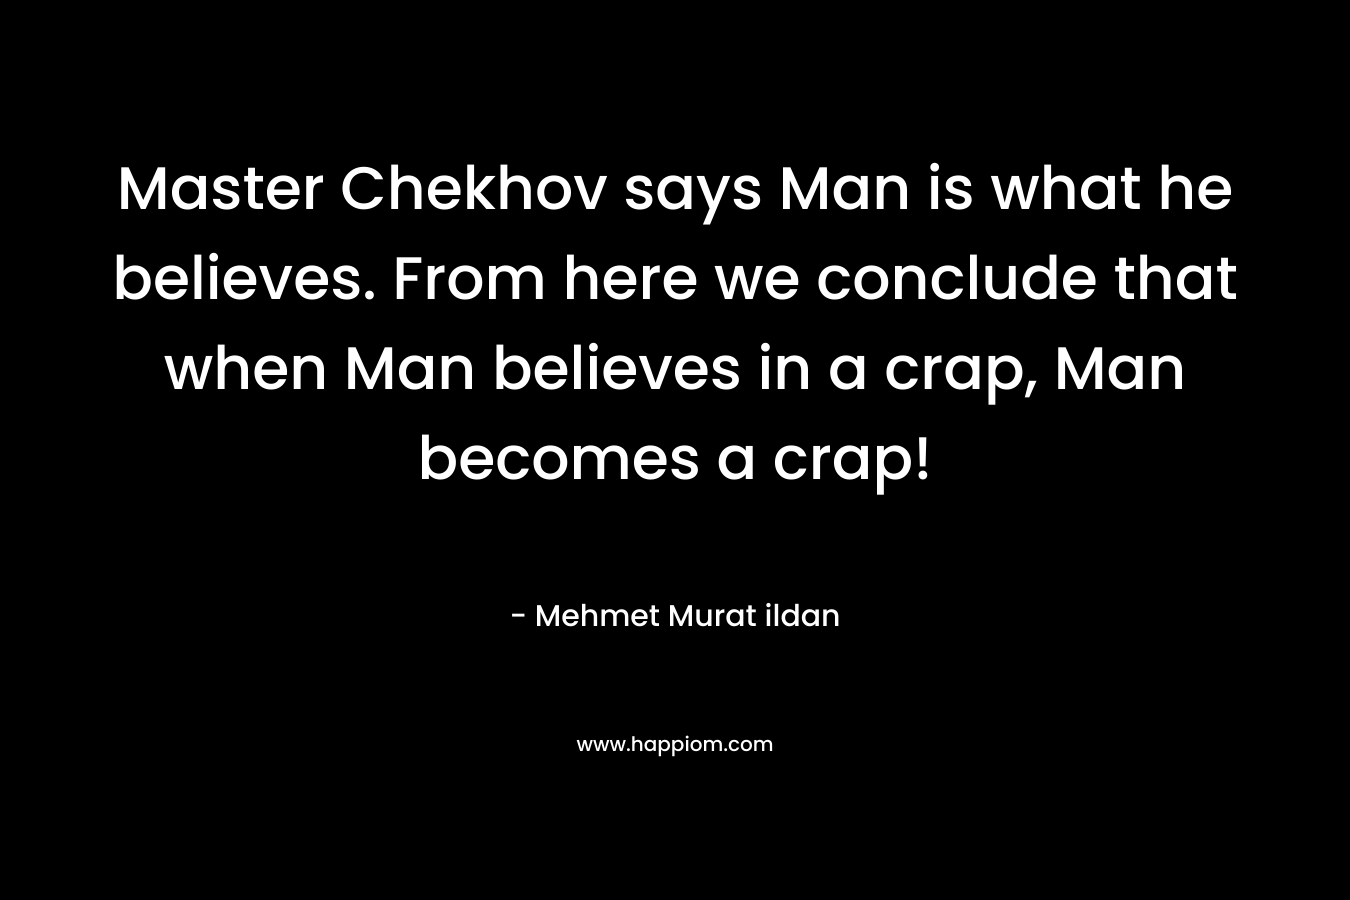 Master Chekhov says Man is what he believes. From here we conclude that when Man believes in a crap, Man becomes a crap!